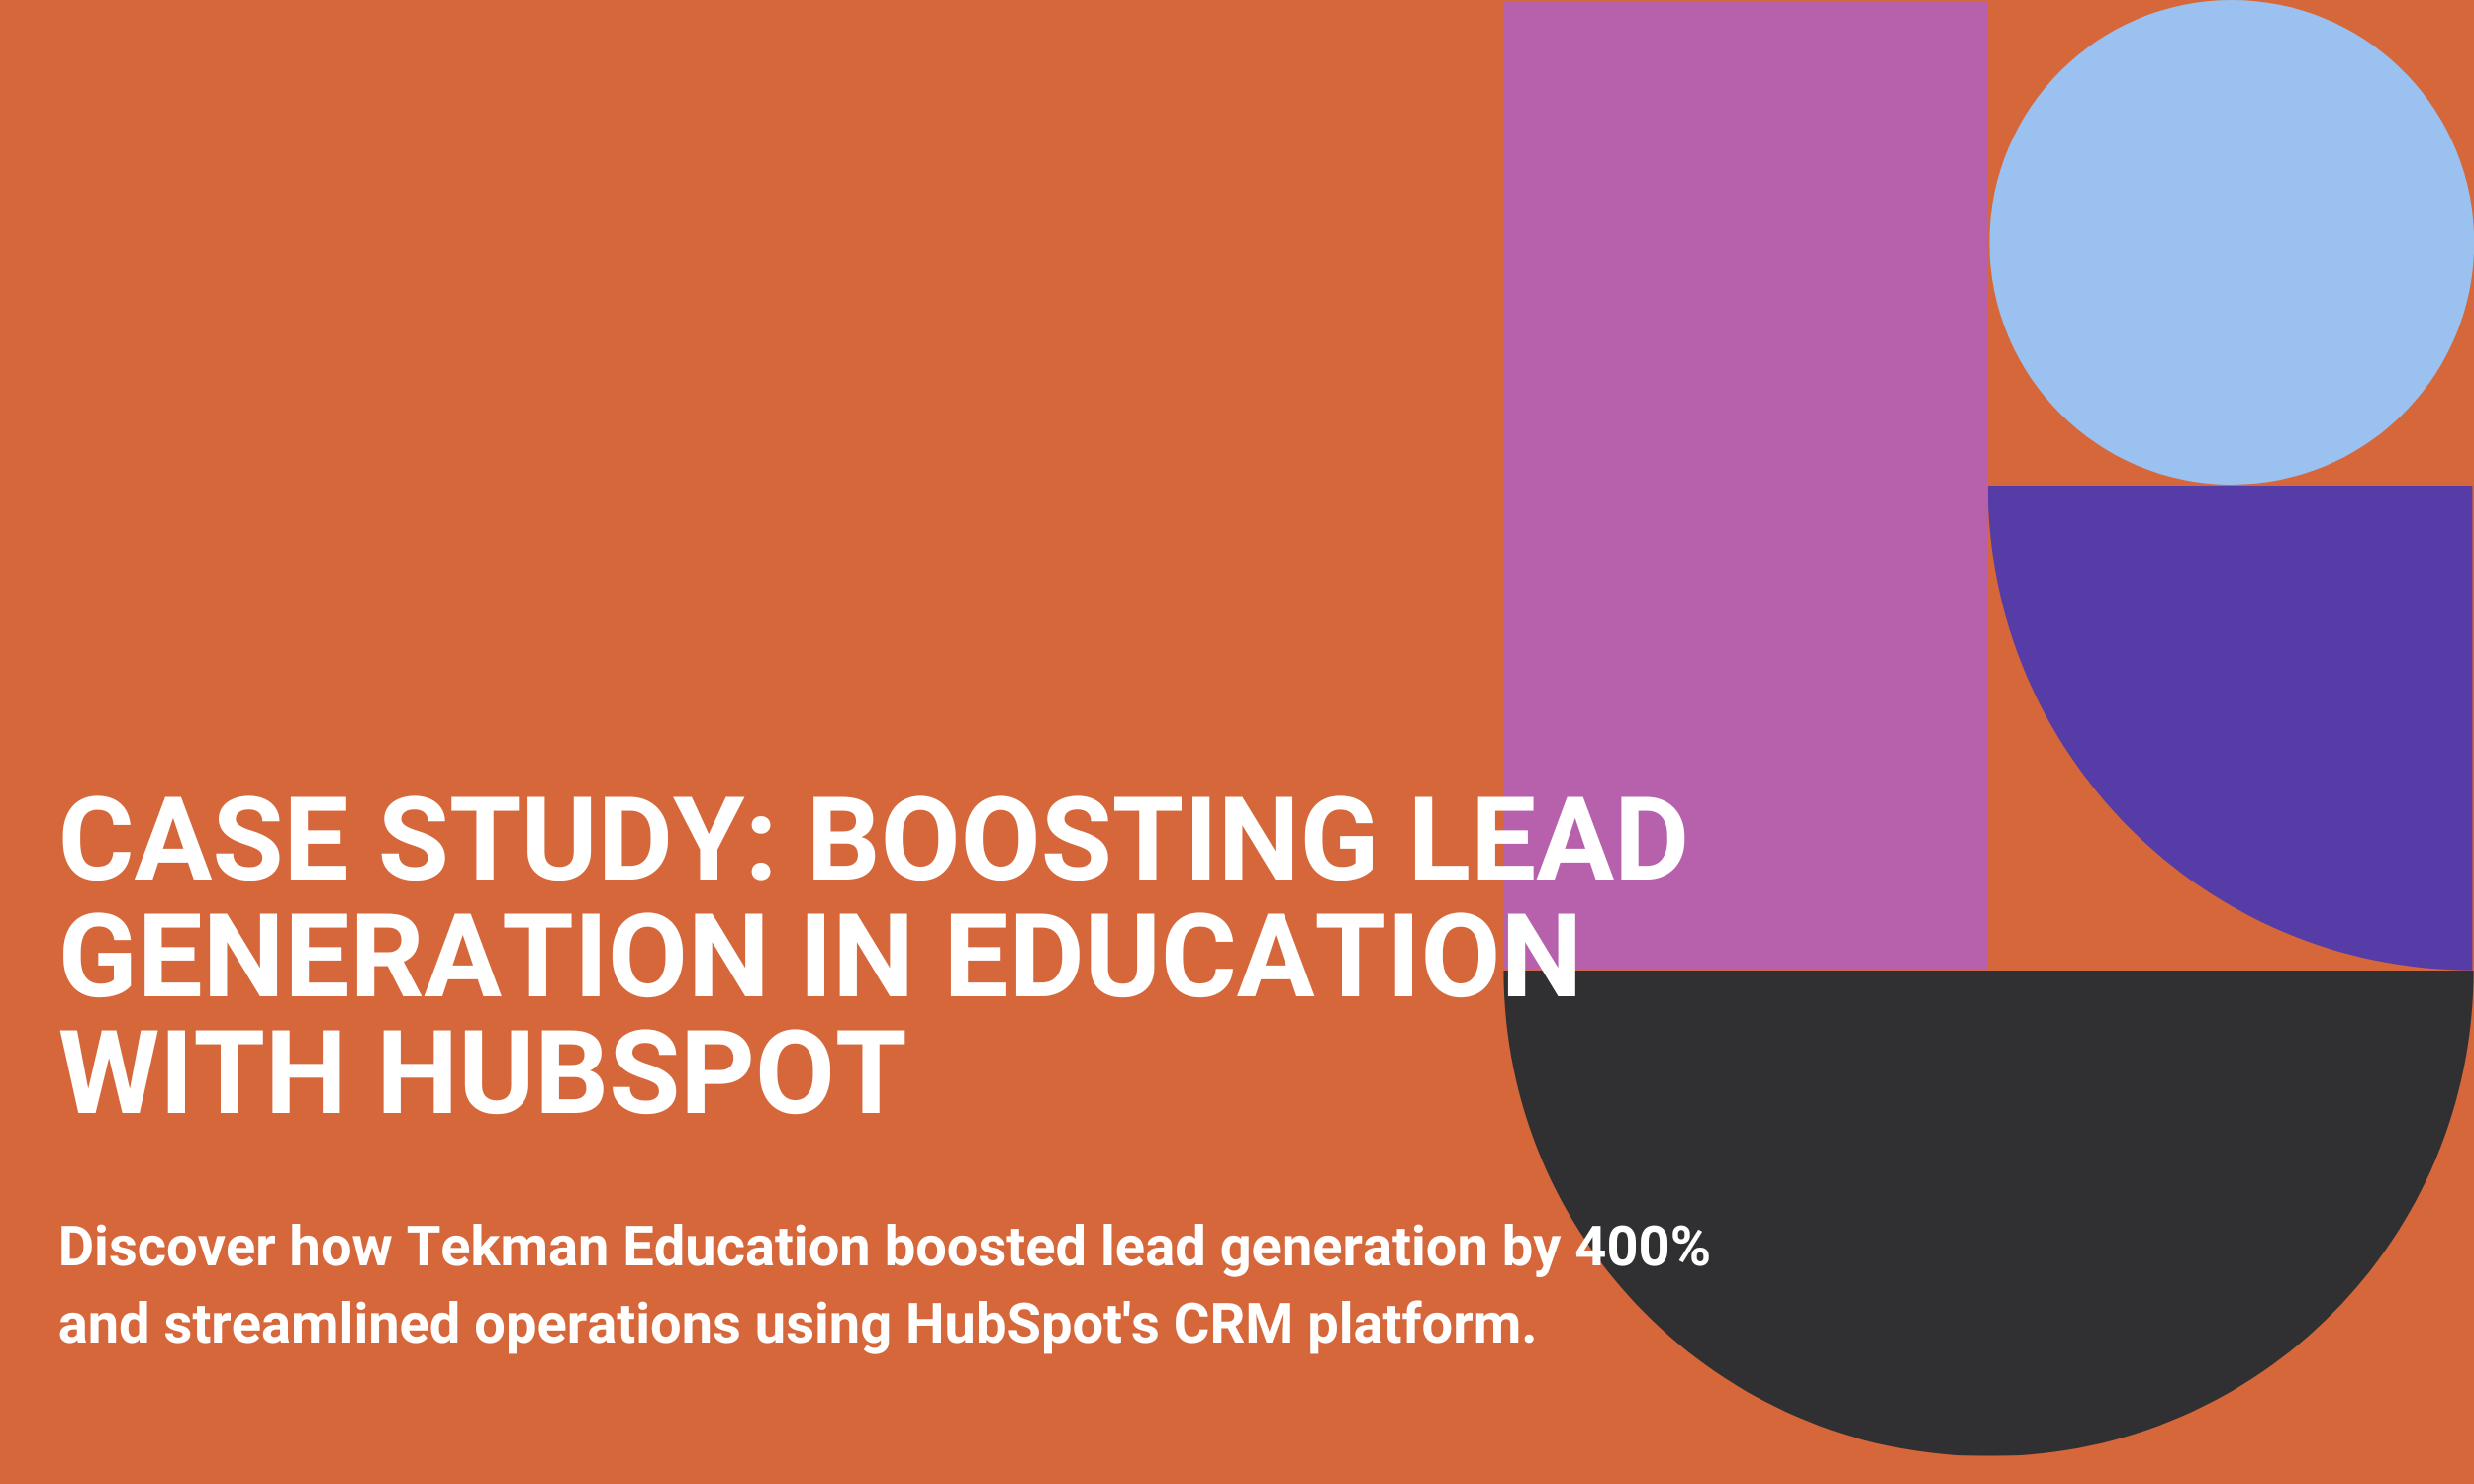 Case Study: Boosting Lead Generation in Education With HubSpot